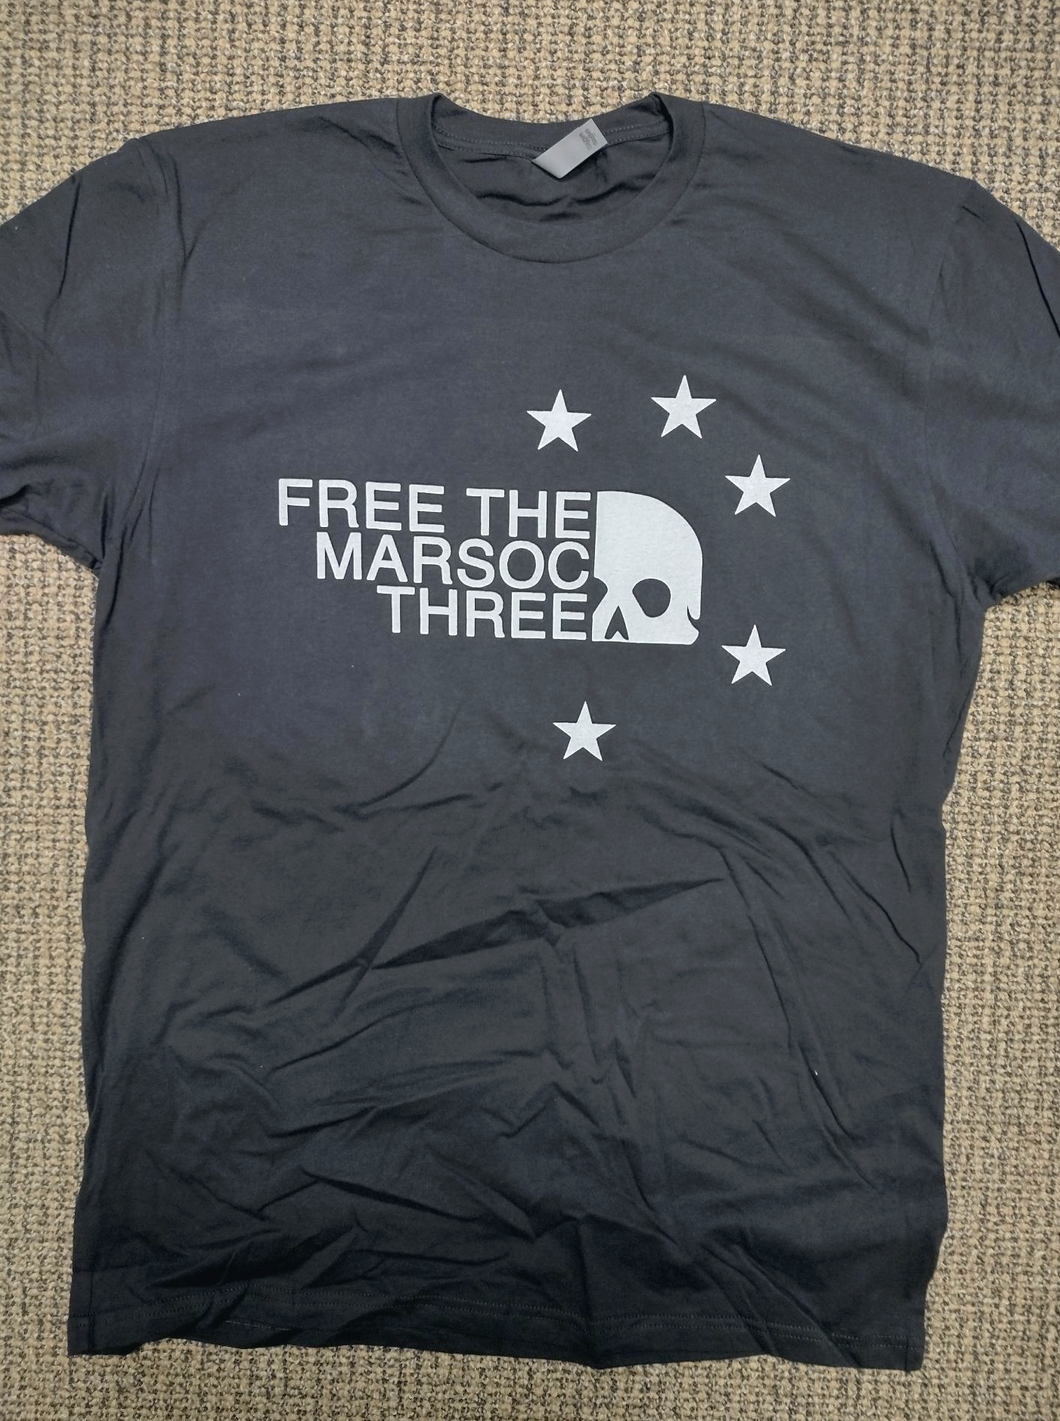 'Free The MARSOC Three' T-Shirt from Green Wolf Tactical